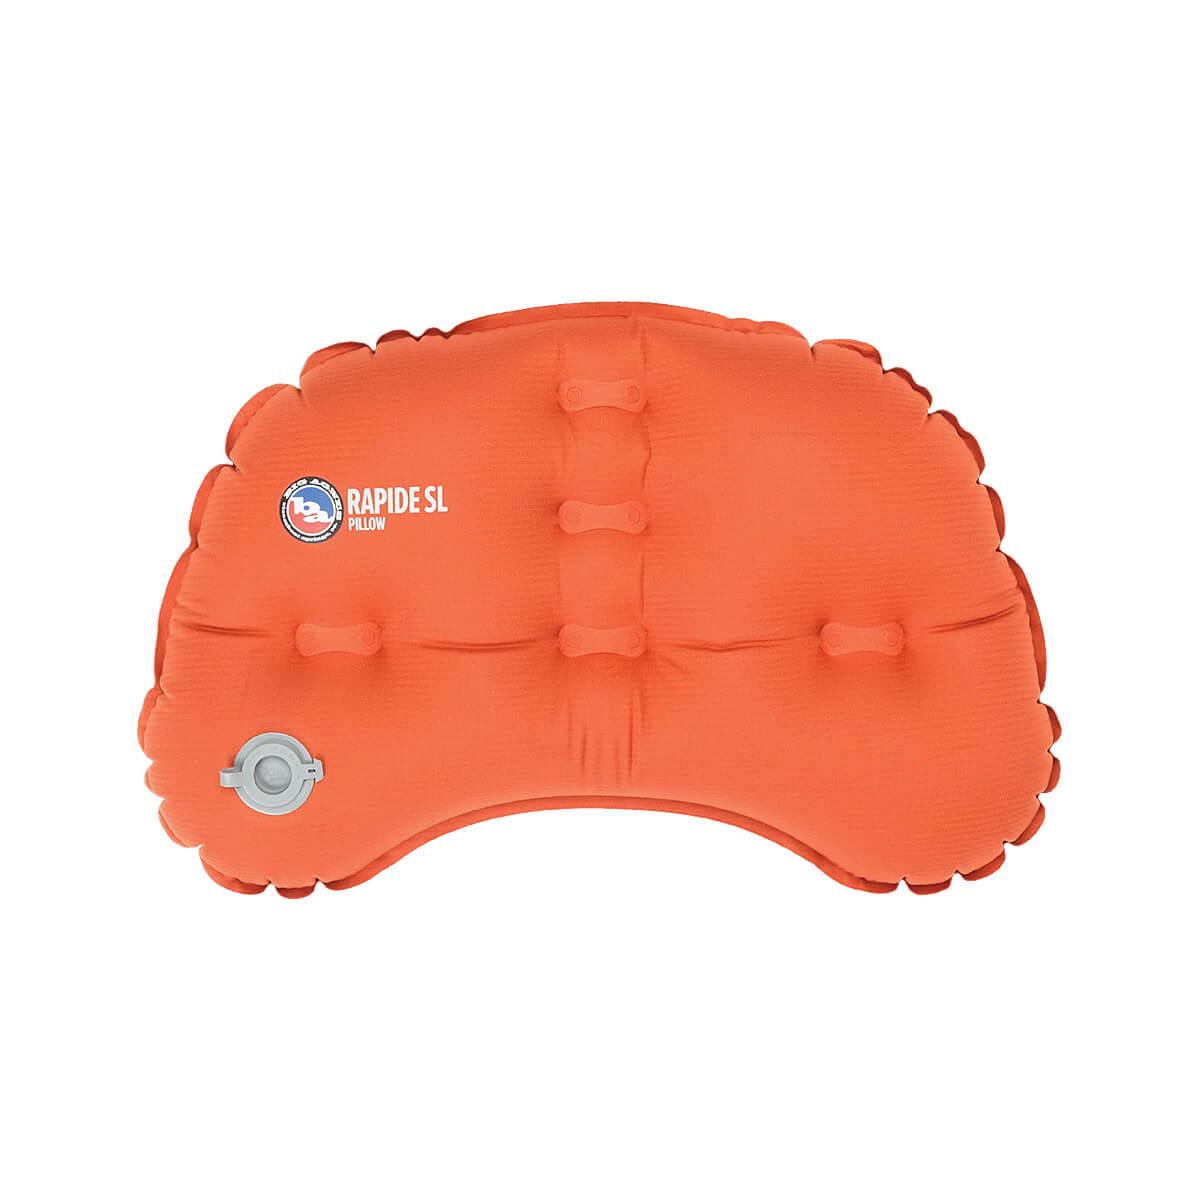  Rapide Sl Inflatable Pillow